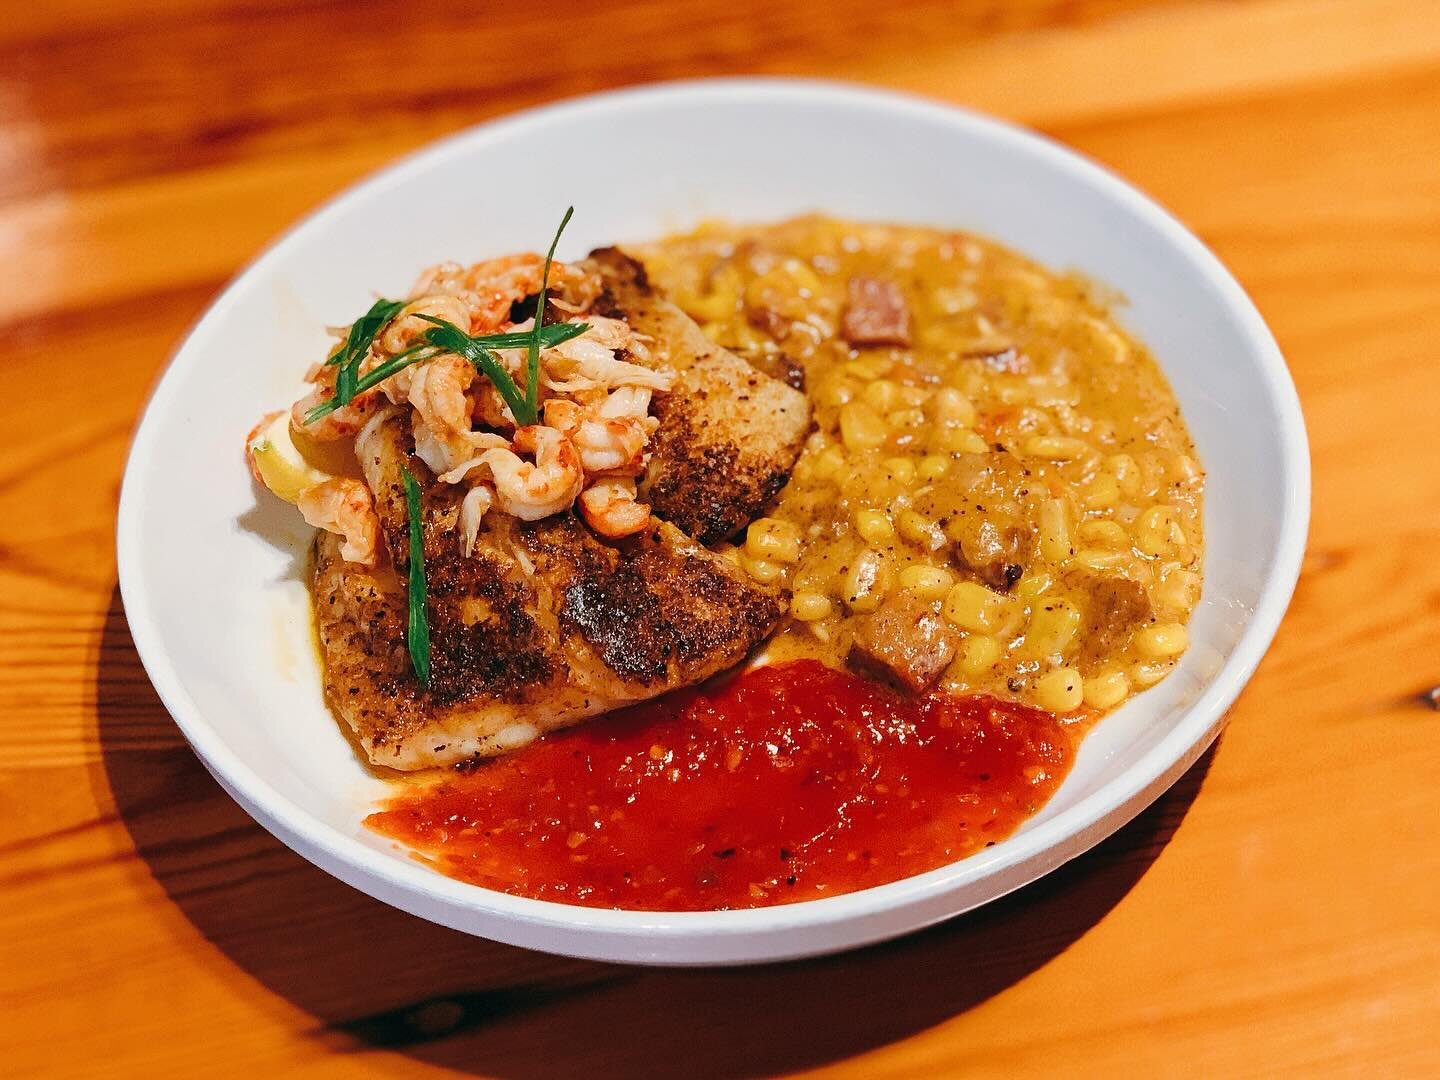 Dine with Us &amp; Enjoy Our Cajun Grouper! &bull; Blackened Grouper over Corn Maque Choux &amp; Red Pepper Coulis and topped with Crystal Crawfish Tails &amp; Green Onions! 🍽 Open 11AM to 9PM!